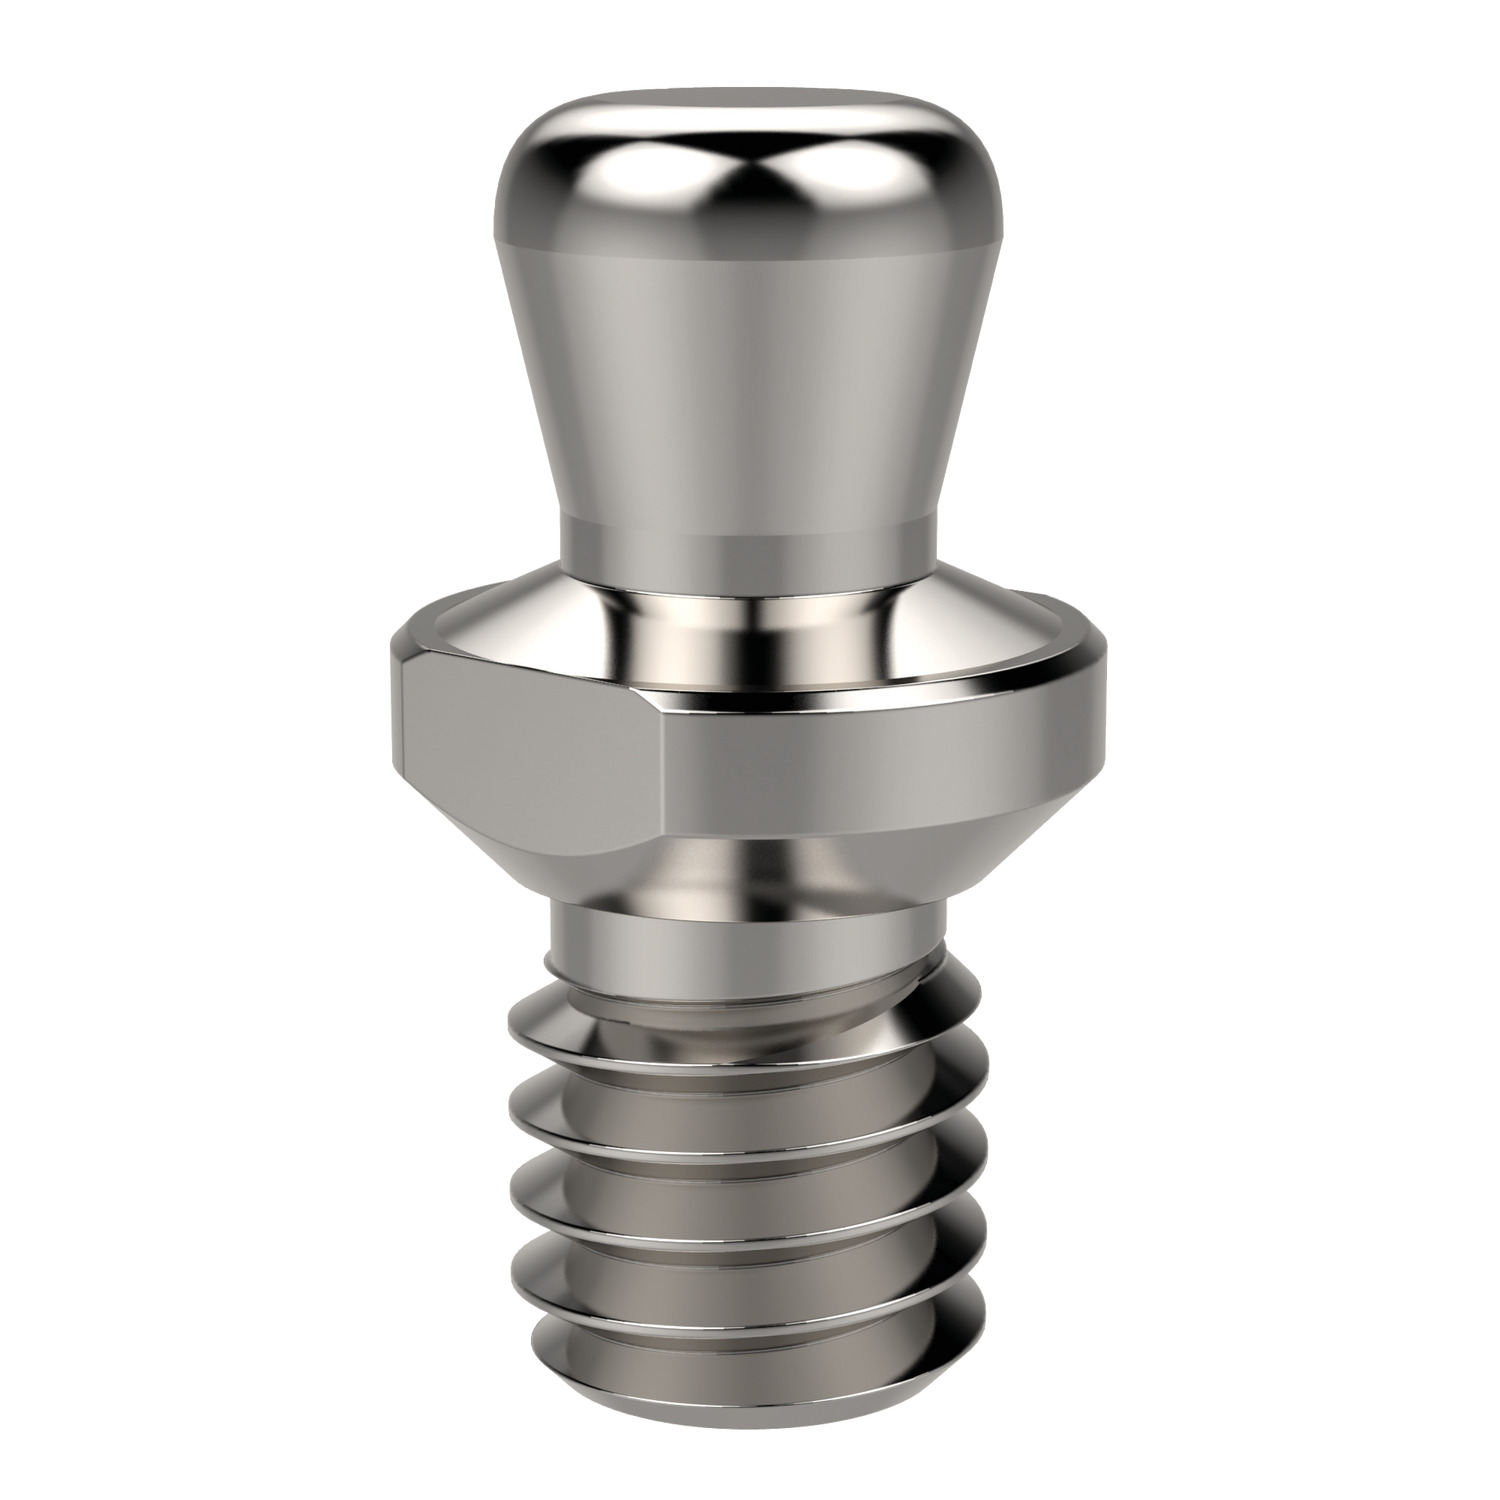 One-Touch Fastener - Ball Clamping Ball clamping one-touch fastener pin made from stanless steel (SUS630). For use in materials with a minimum depth of 6mm and full surface contact.